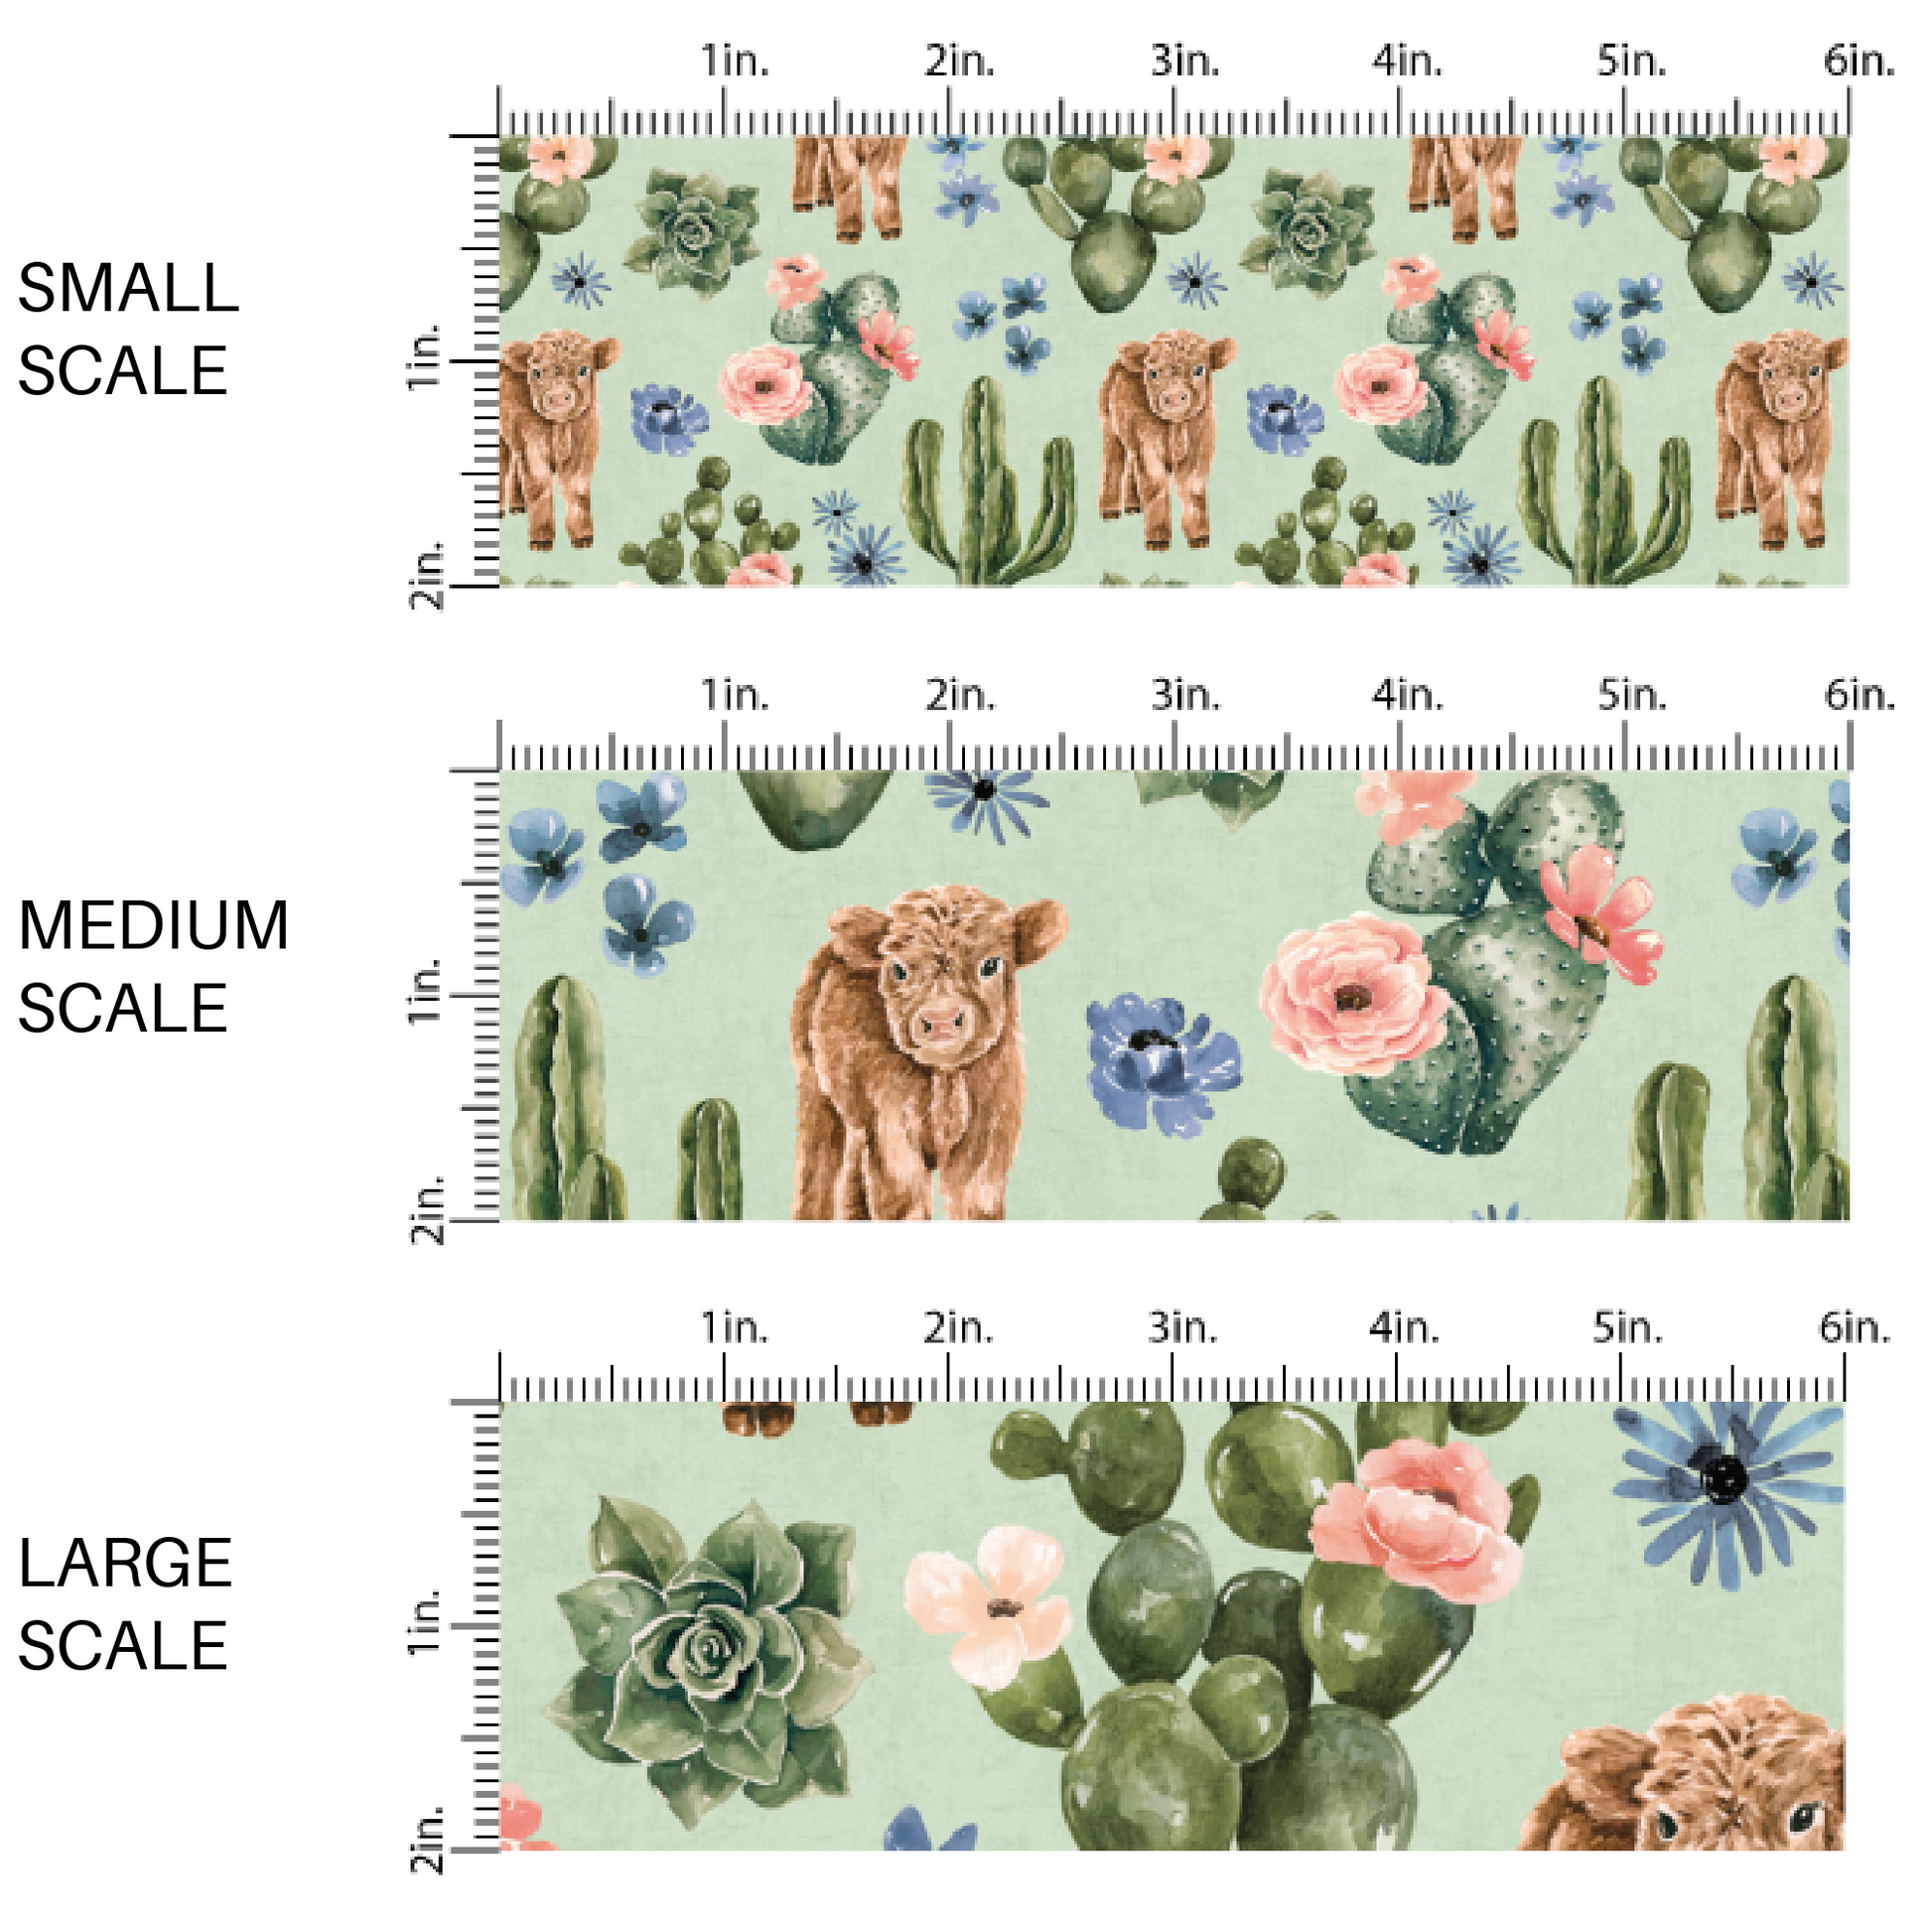 This scale chart of small scale, medium scale, and large scale of these cows, cacti, and flower pattern themed fabric by the yard features brown cows surrounded by pink and blue flower bunches and cacti on aqua blue. This fun floral fabric can be used for all your sewing and crafting needs!